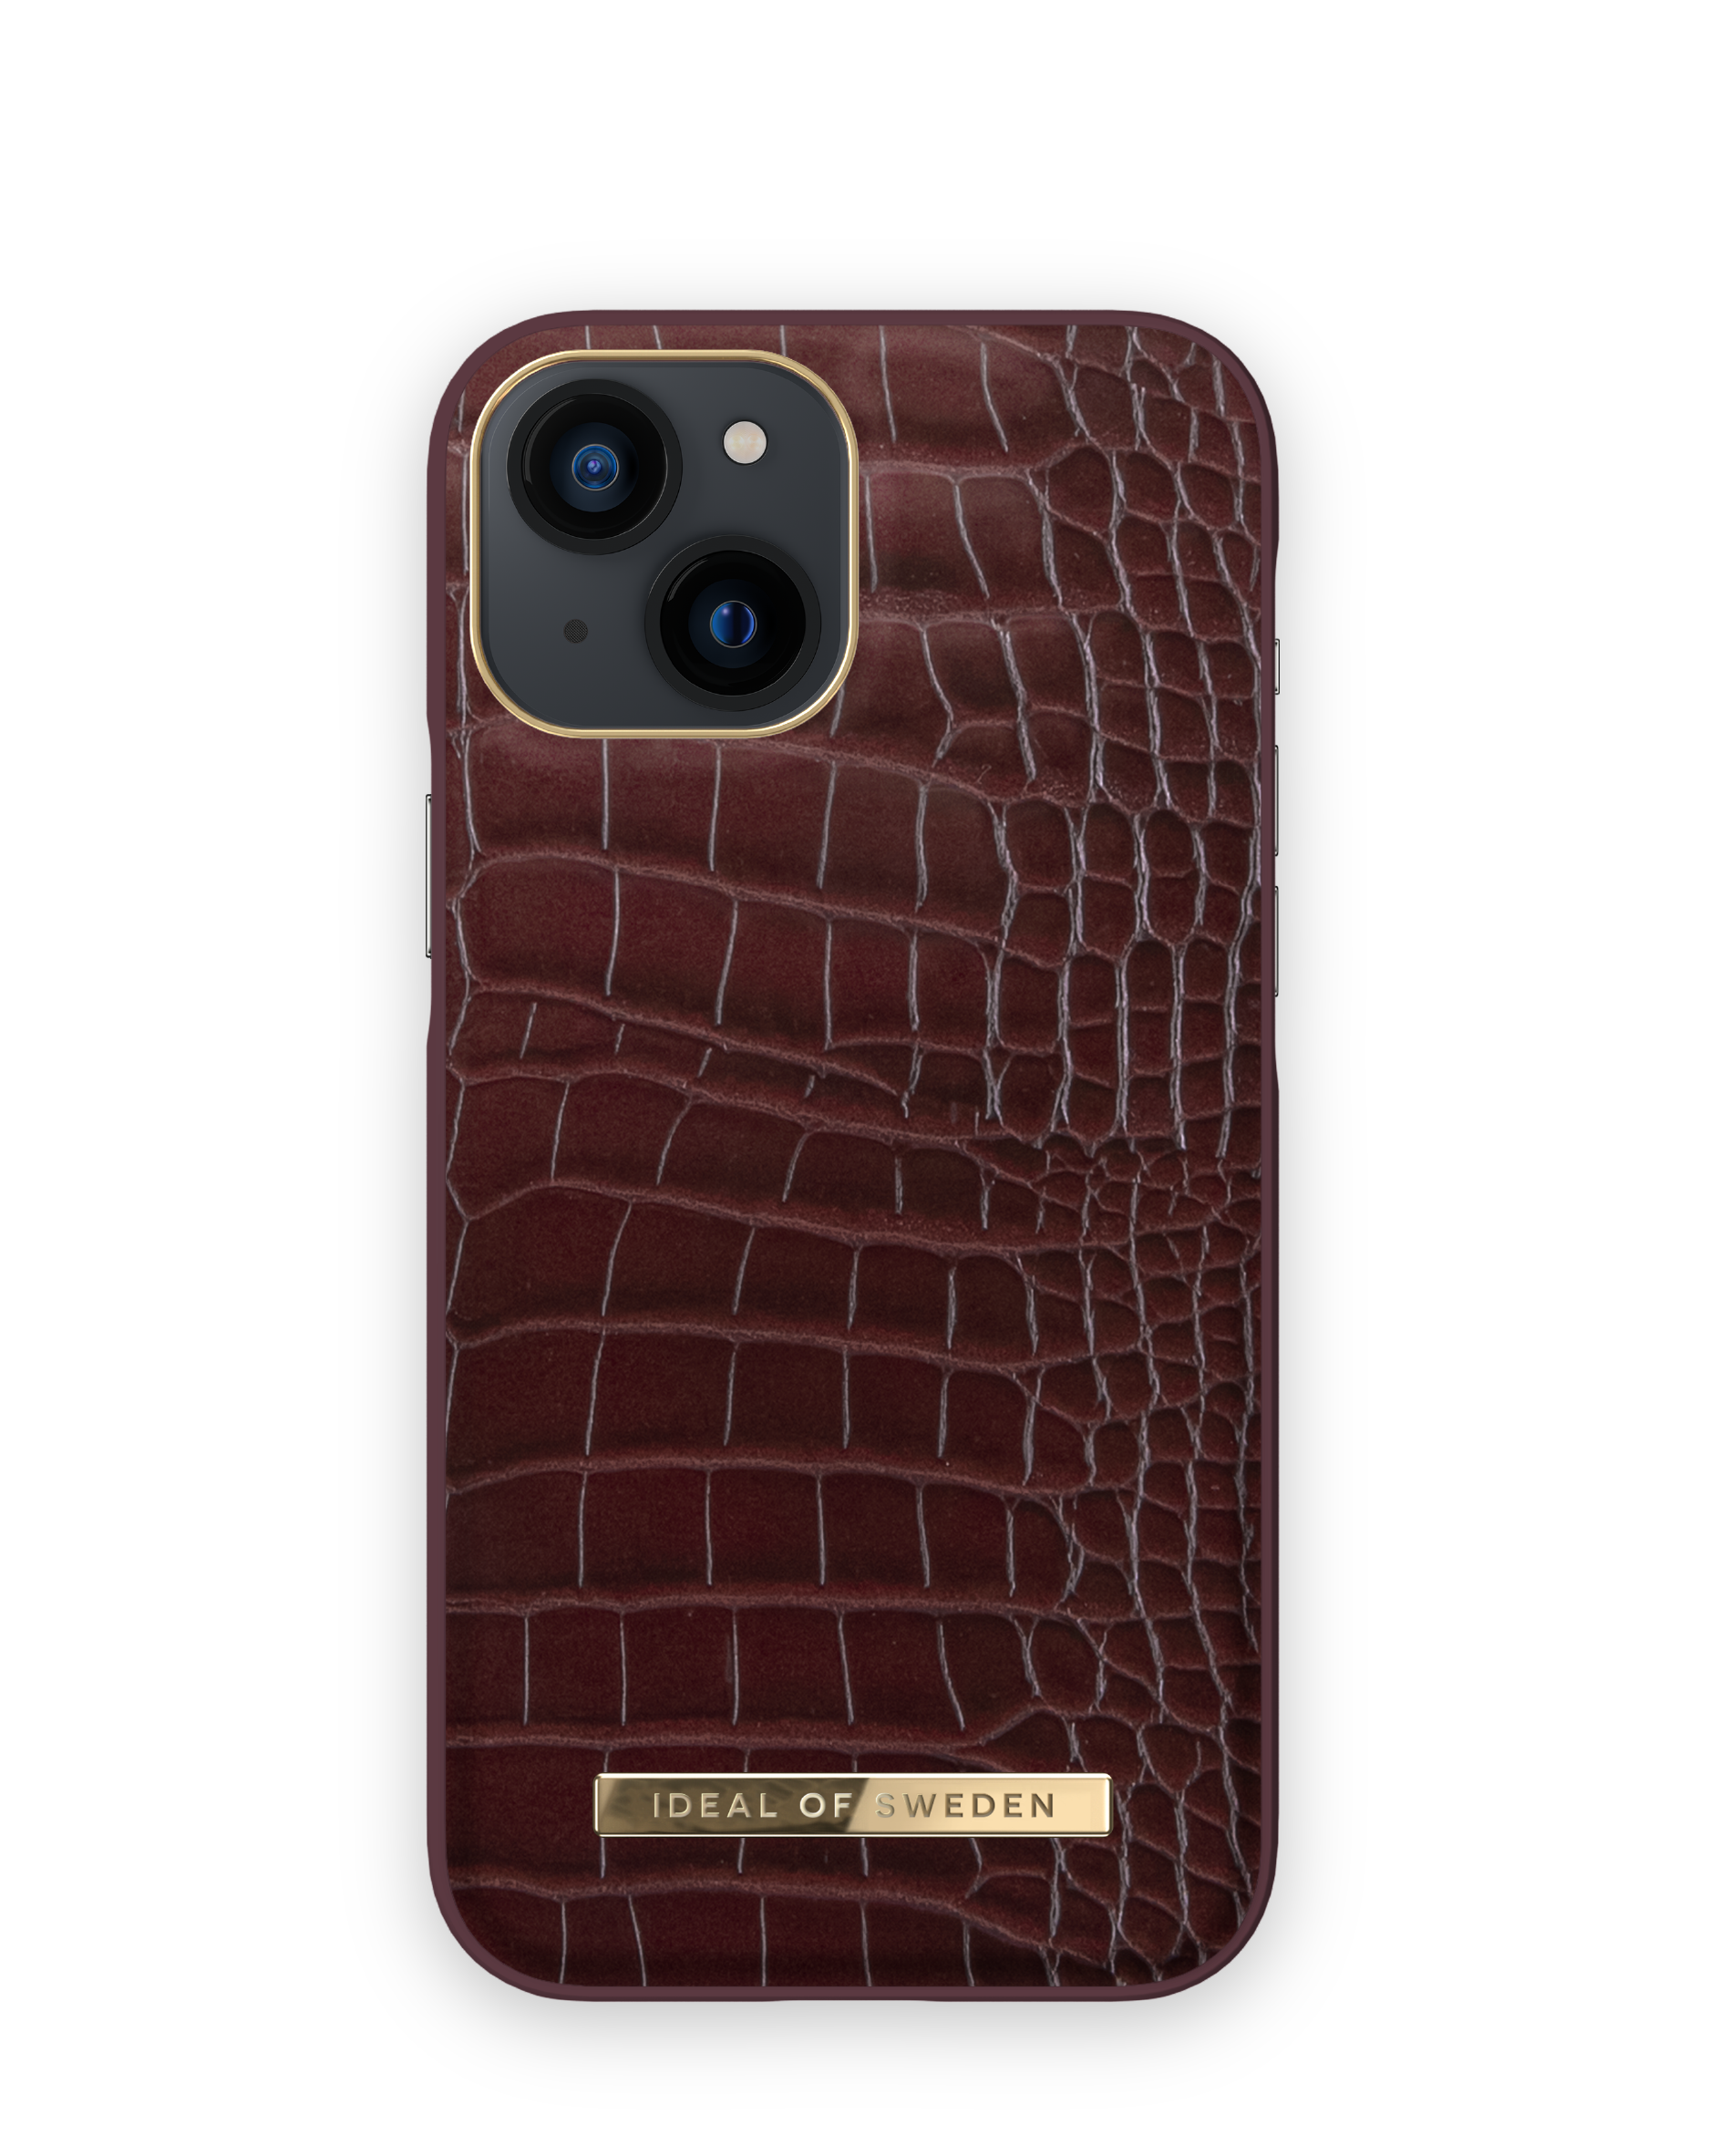 Mini, Backcover, 13 Apple, Scarlet iPhone IDACAW21-I2154-326, Croco SWEDEN IDEAL OF